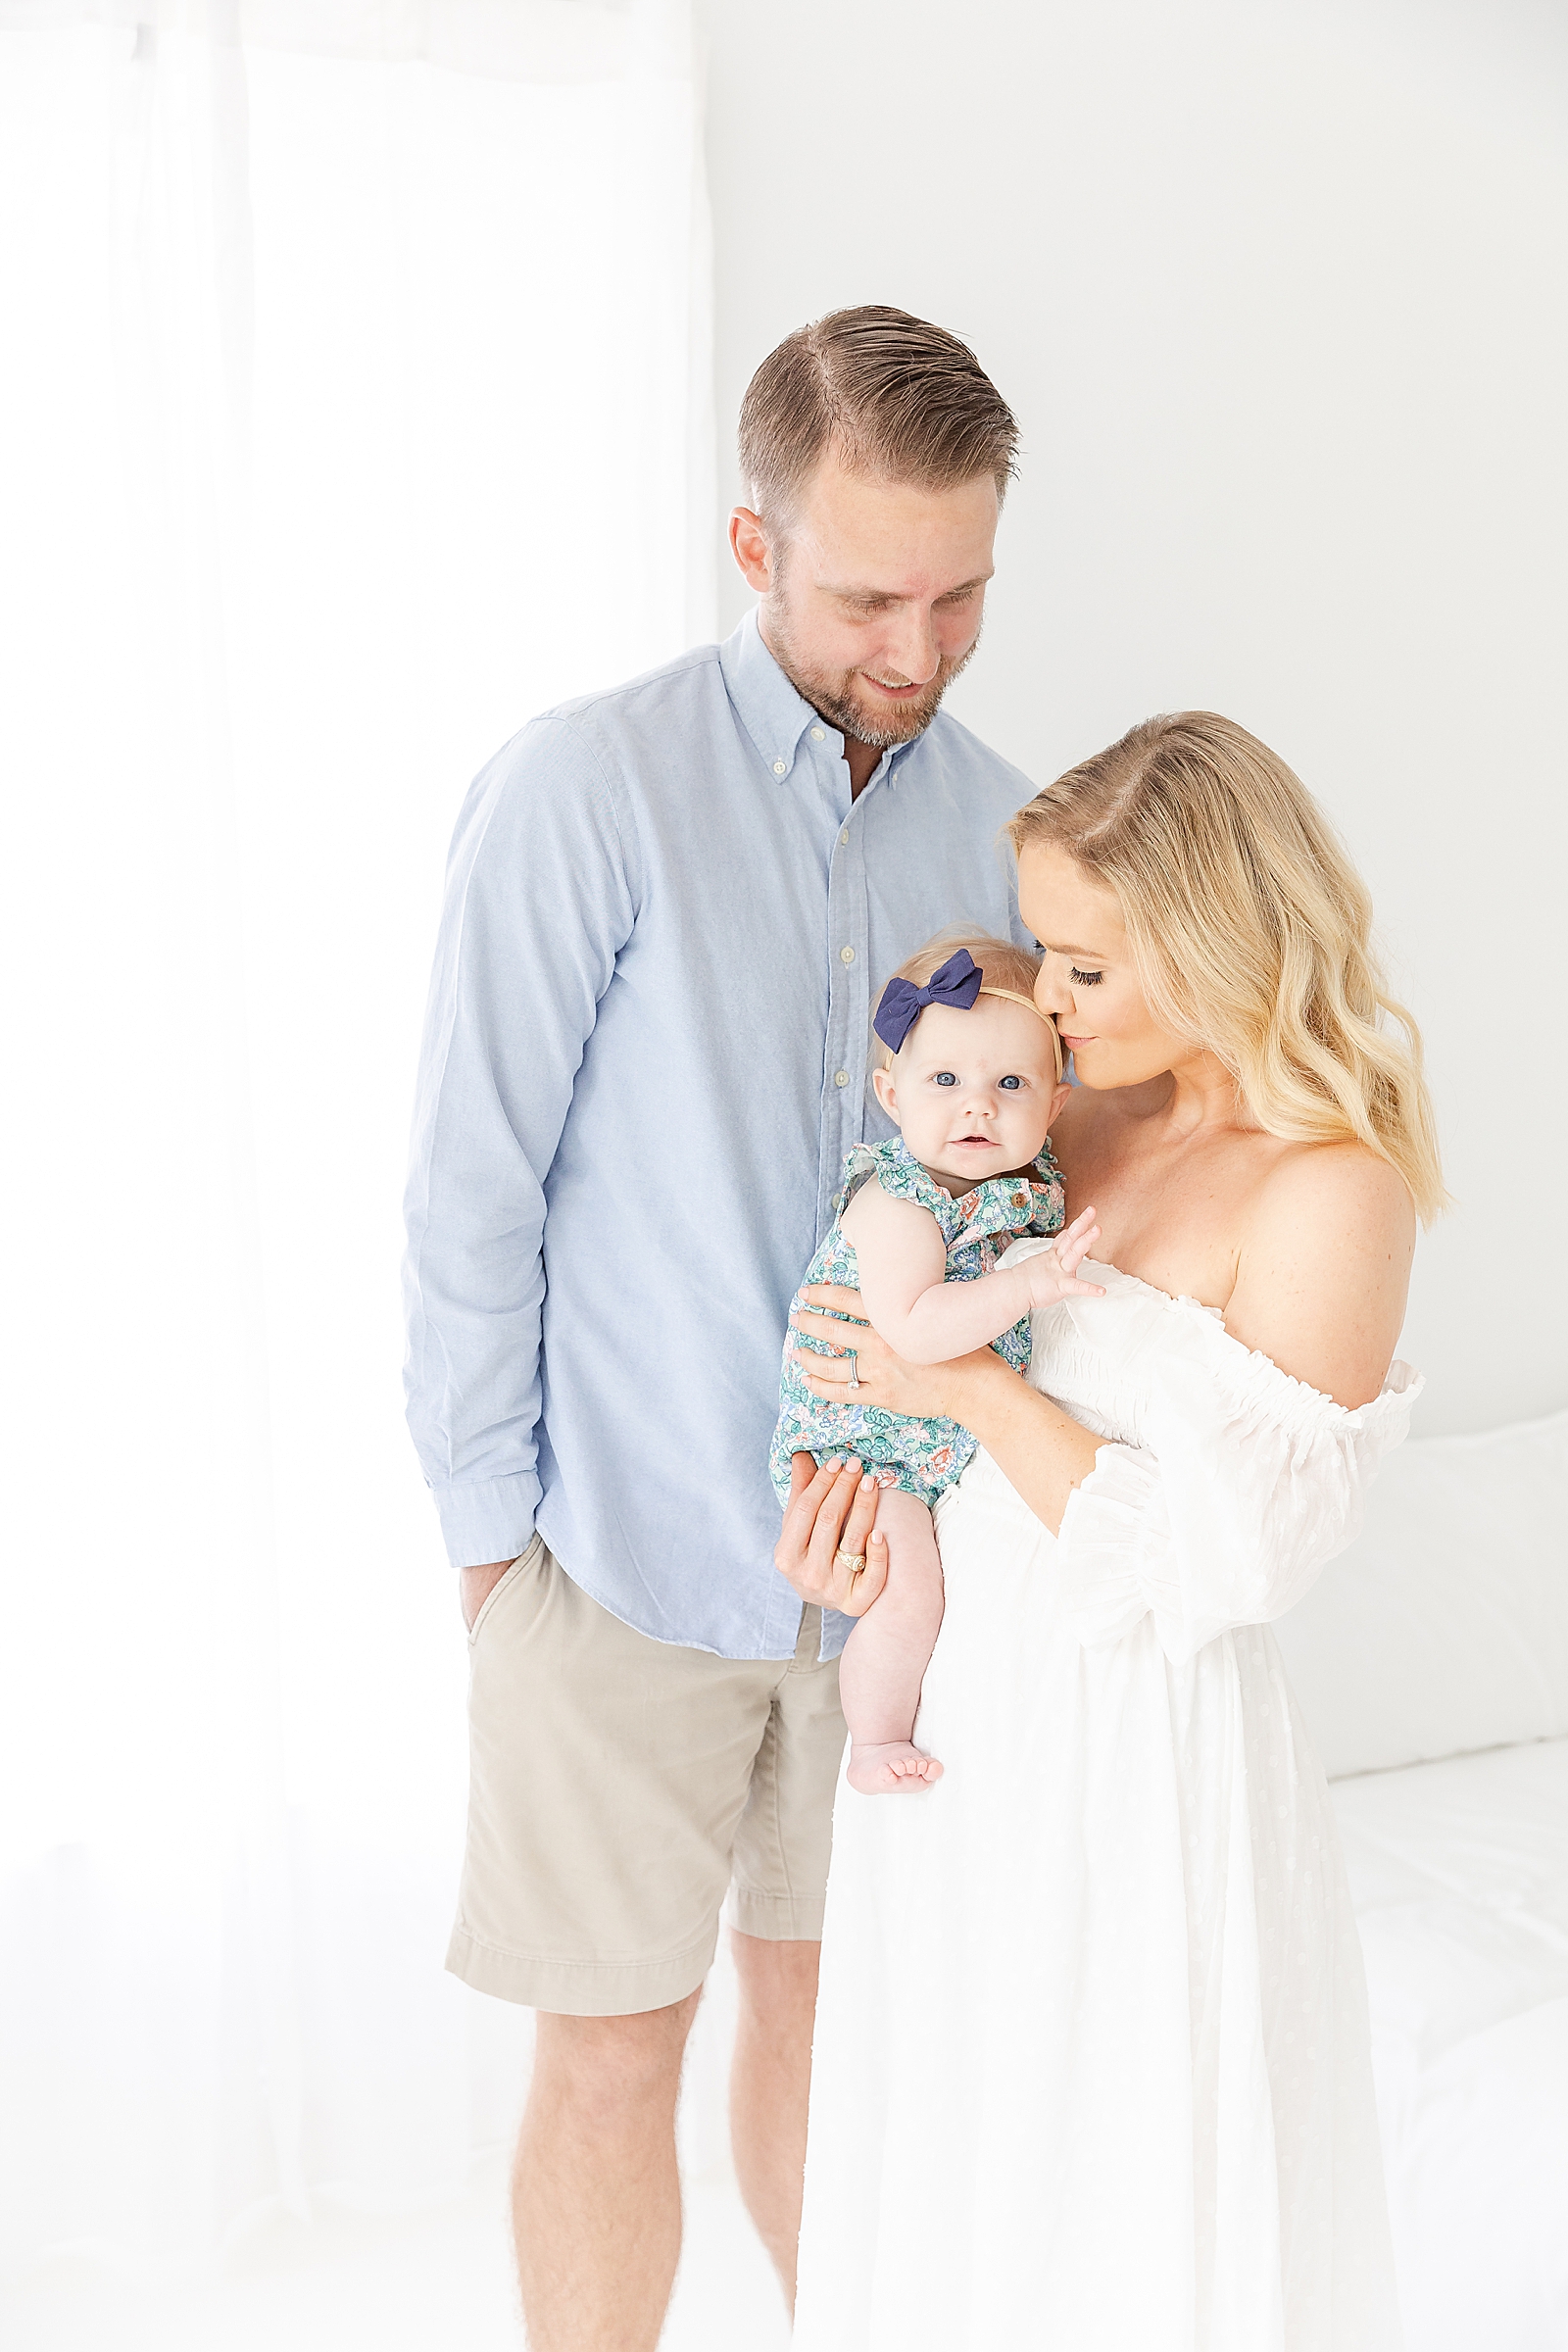 studio family session mom wearing white off the shoulder dress and dad wearing flue shirt and kaki short standing looking at baby smiling